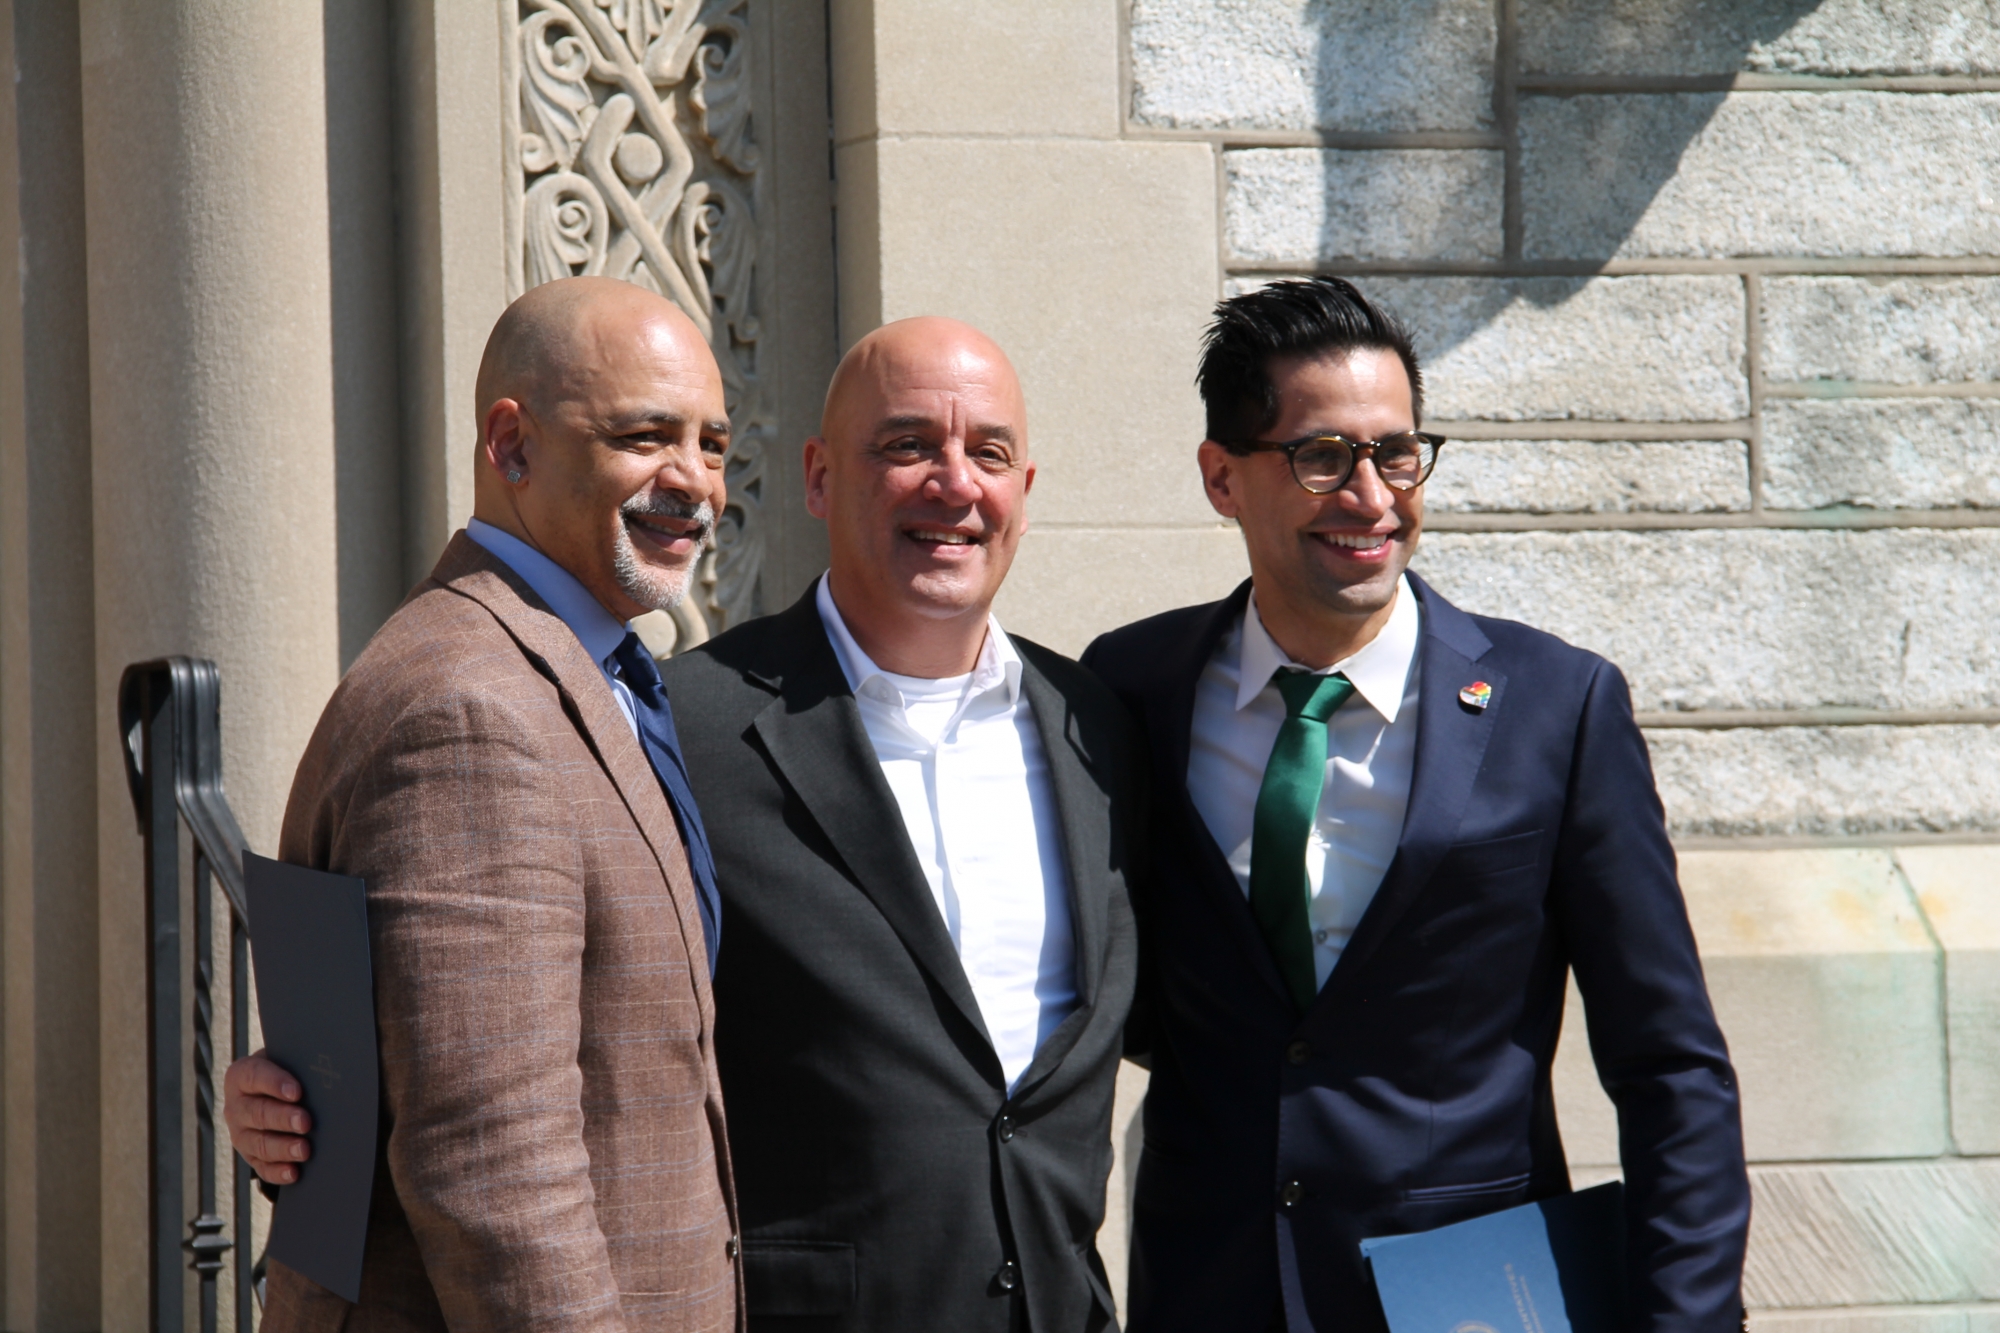 From L to R: State Representative Chris Rabb, CHC President William Latimer, and State Representative Tarik Khan pose for a photo during the citation ceremony.